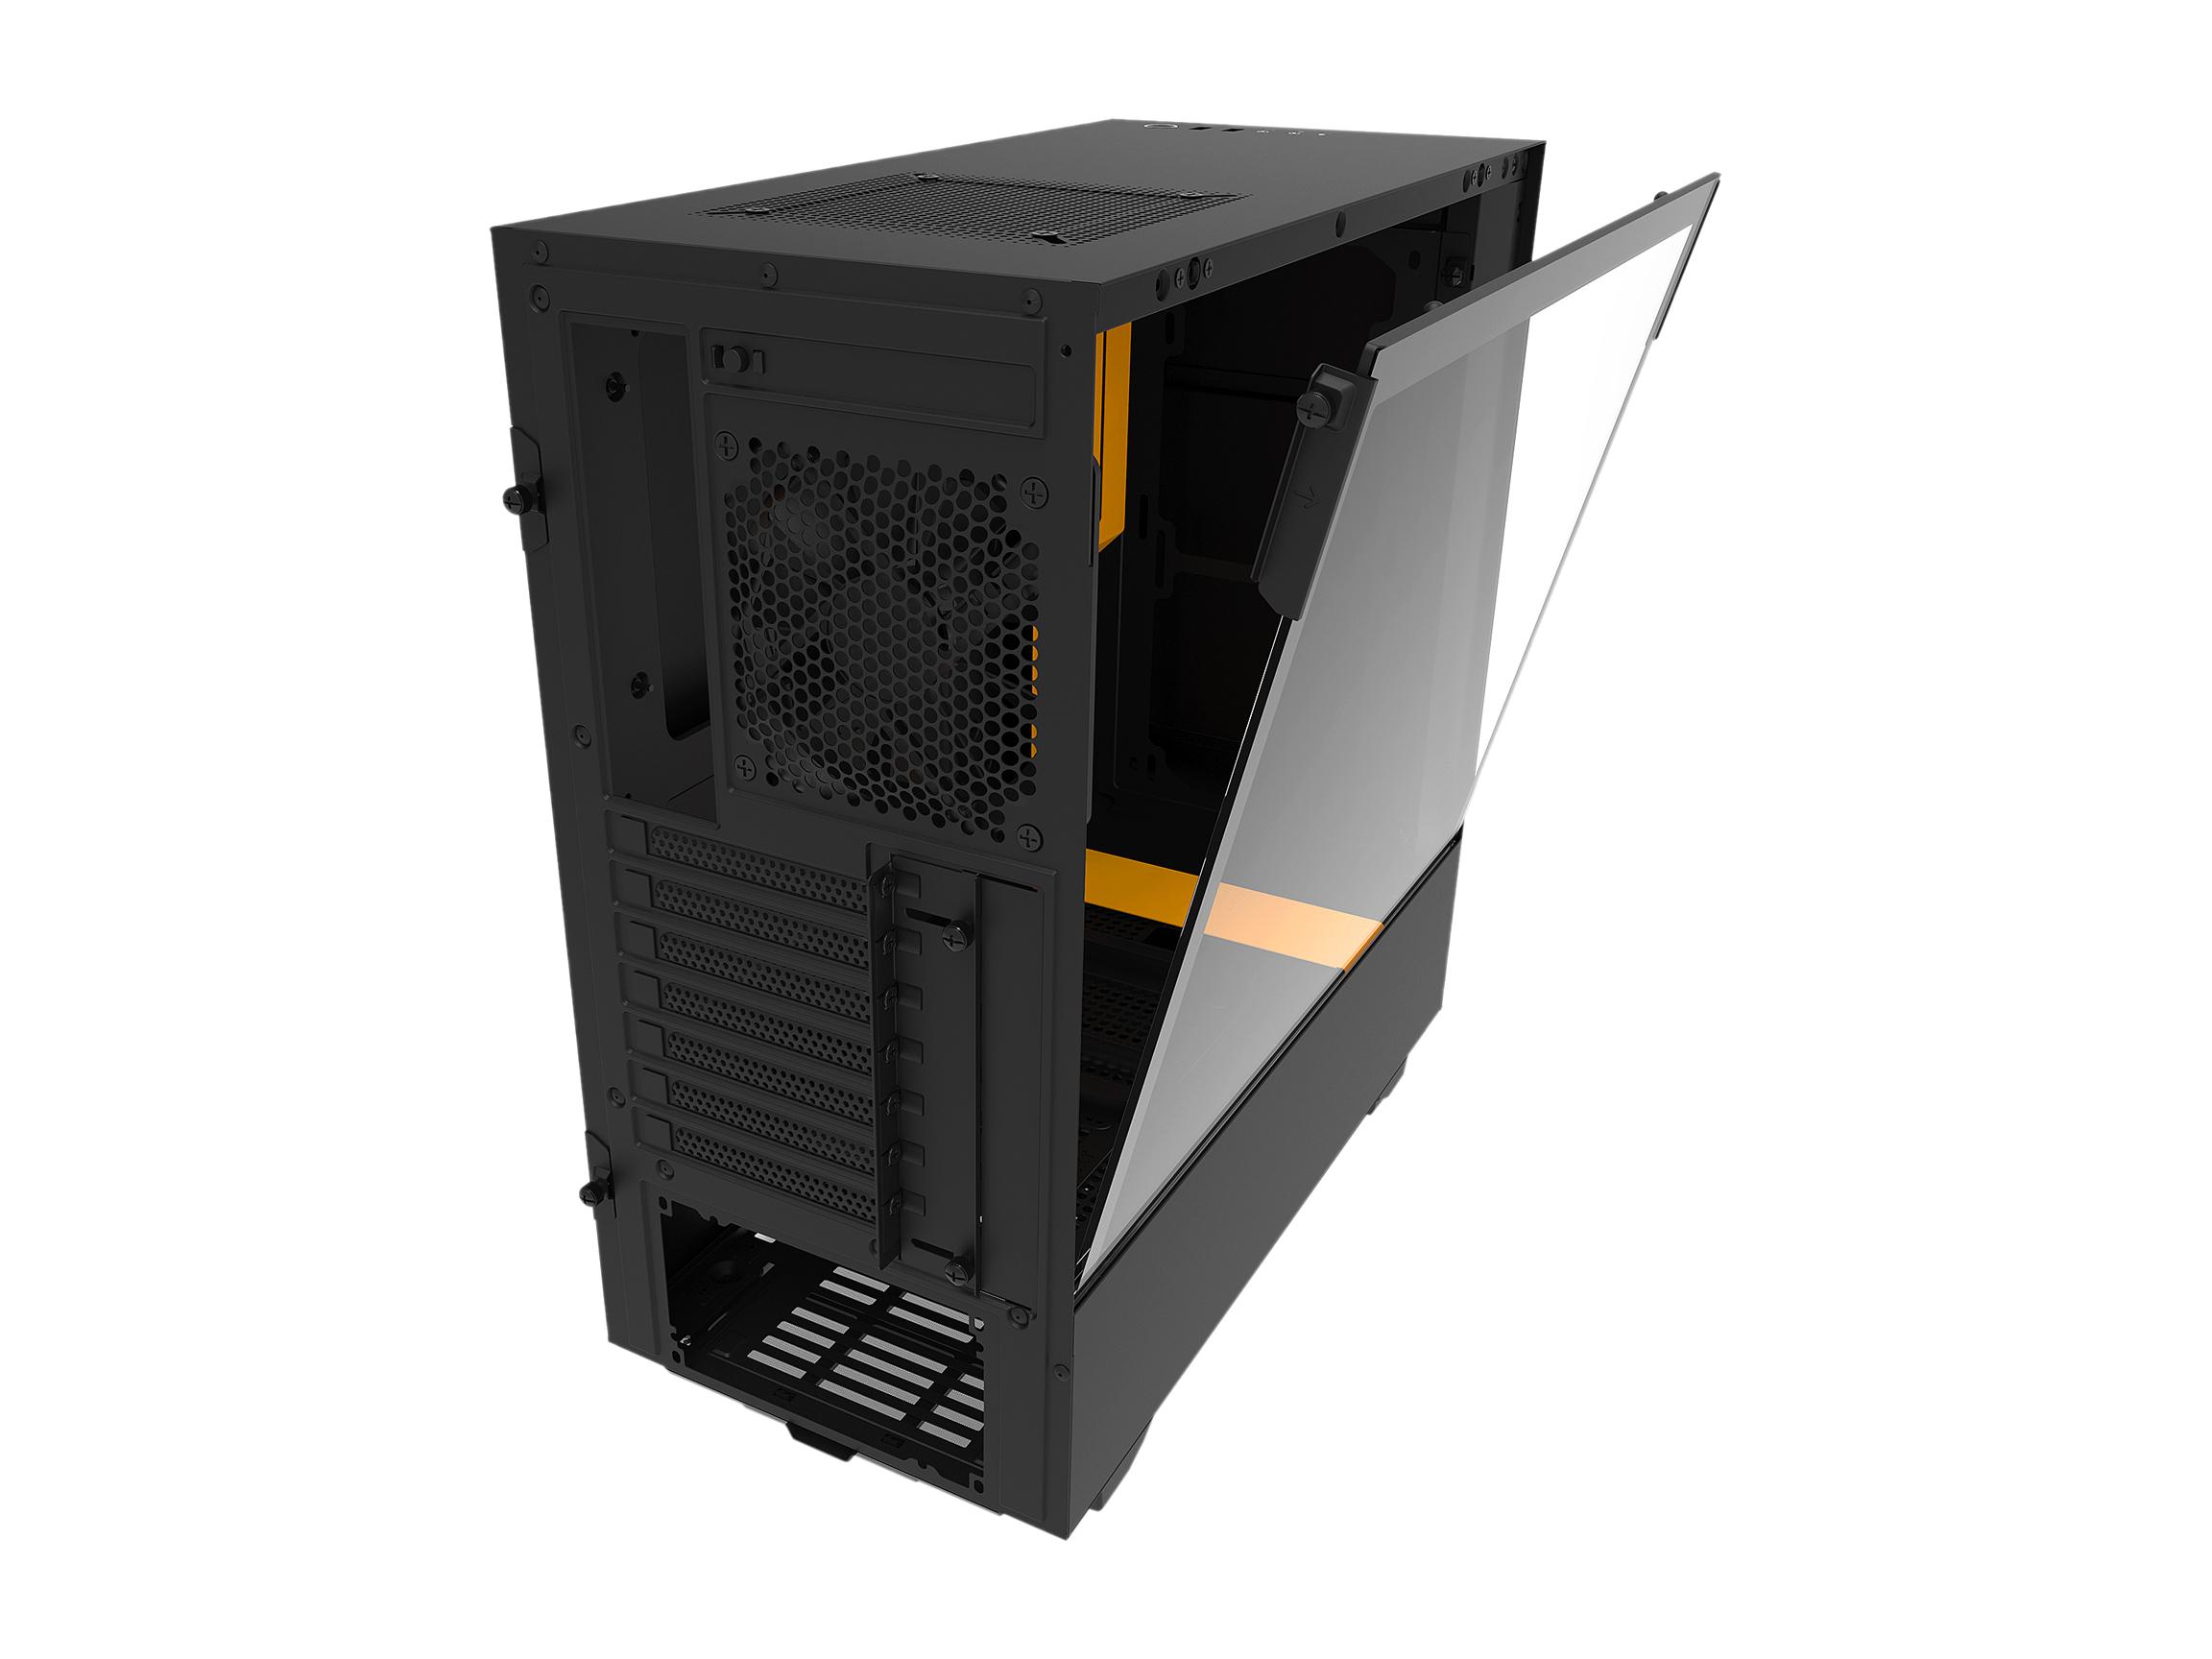 NZXT H500 OVERWATCH ATX MID TOWER CHASSIS